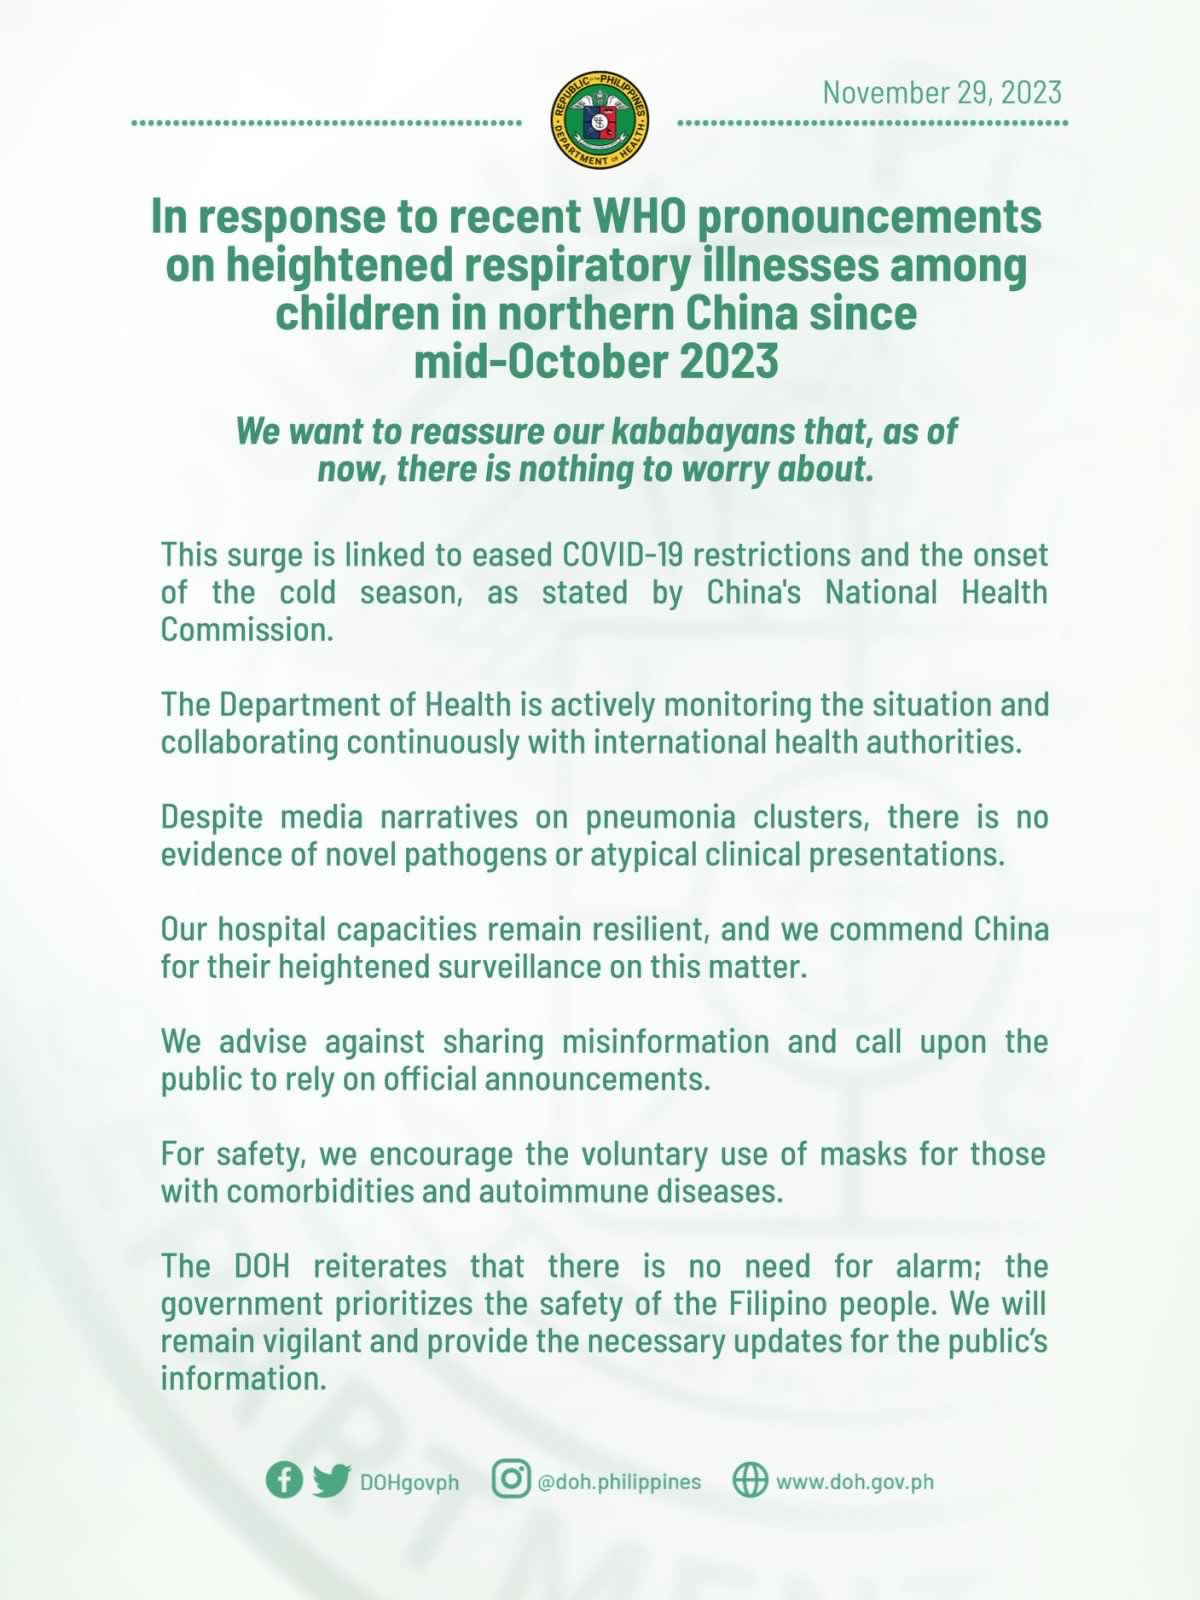 Health Secretary Teodoro Herbosa assured Filipinos on Wednesday that there is no need to panic in light of reports of an increase in respiratory illnesses in Northern China.